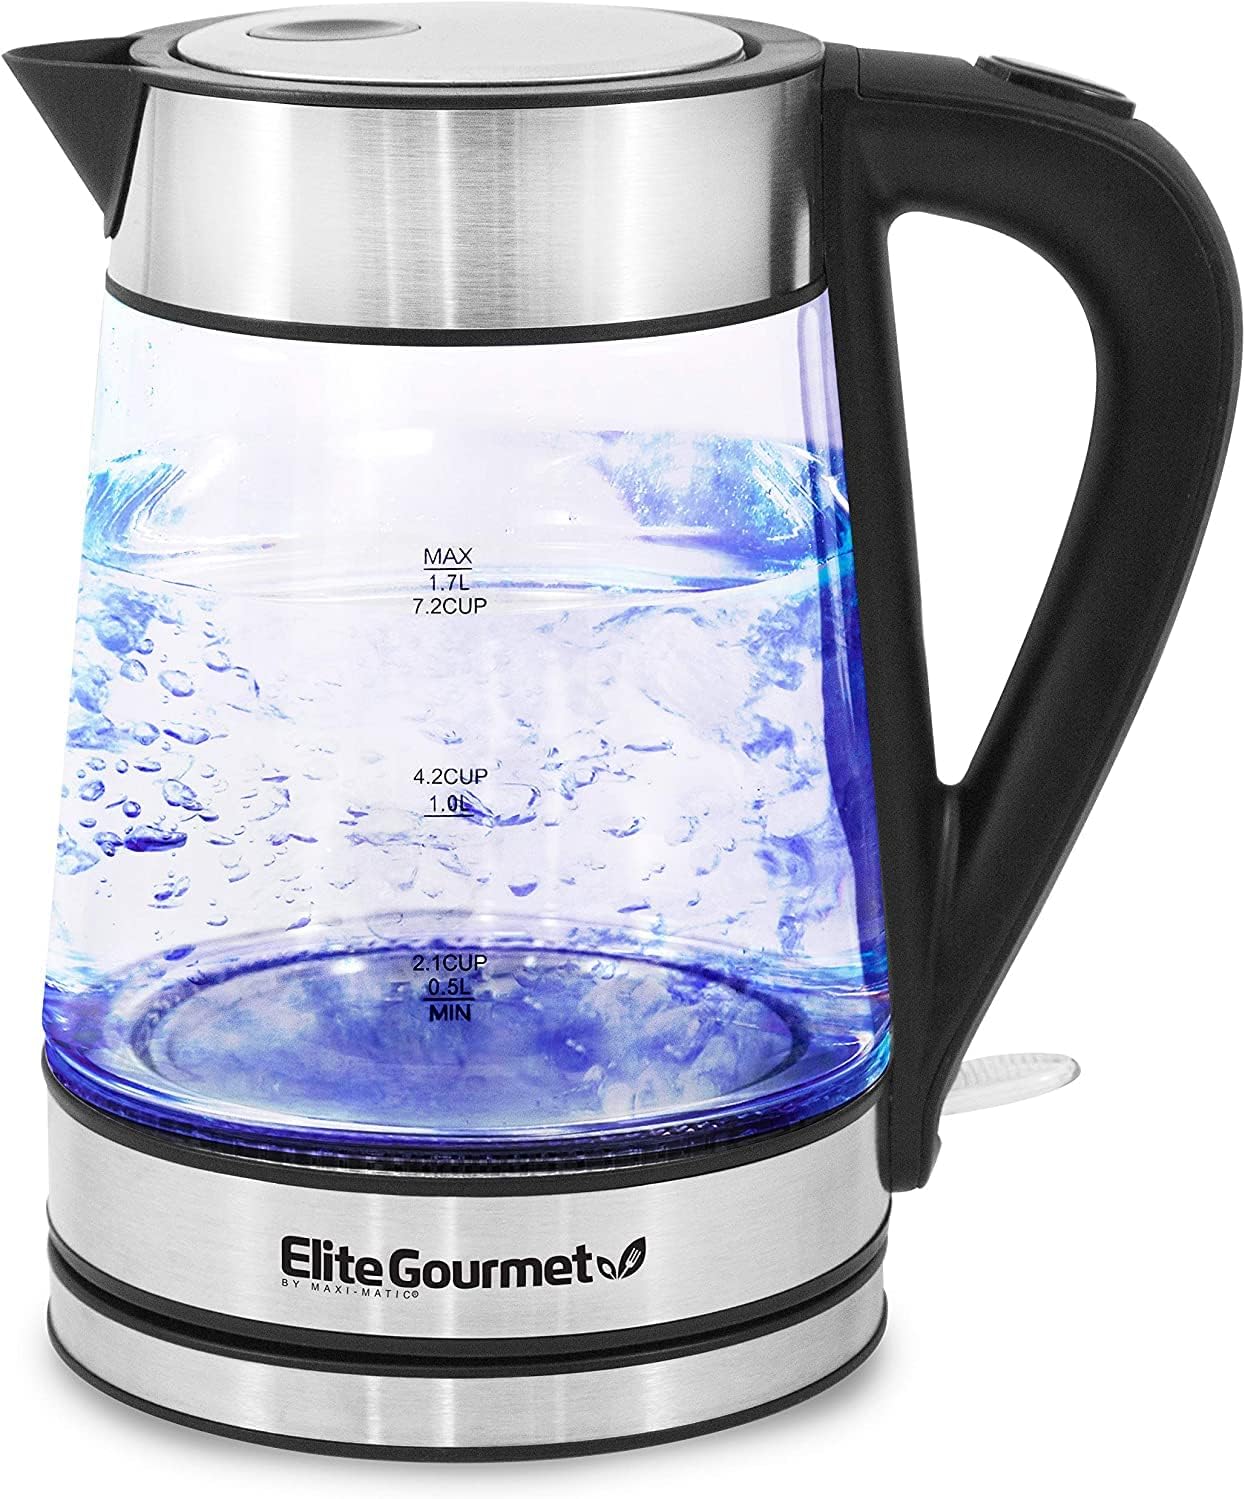 Elite Gourmet EKT-602 Electric 1.7L BPA Free Glass Kettle Cordless 360° Base, Stylish Blue LED Interior, Handy Auto Shut-Off Function – Quickly Boil Water For Tea & More, Stainless Steel